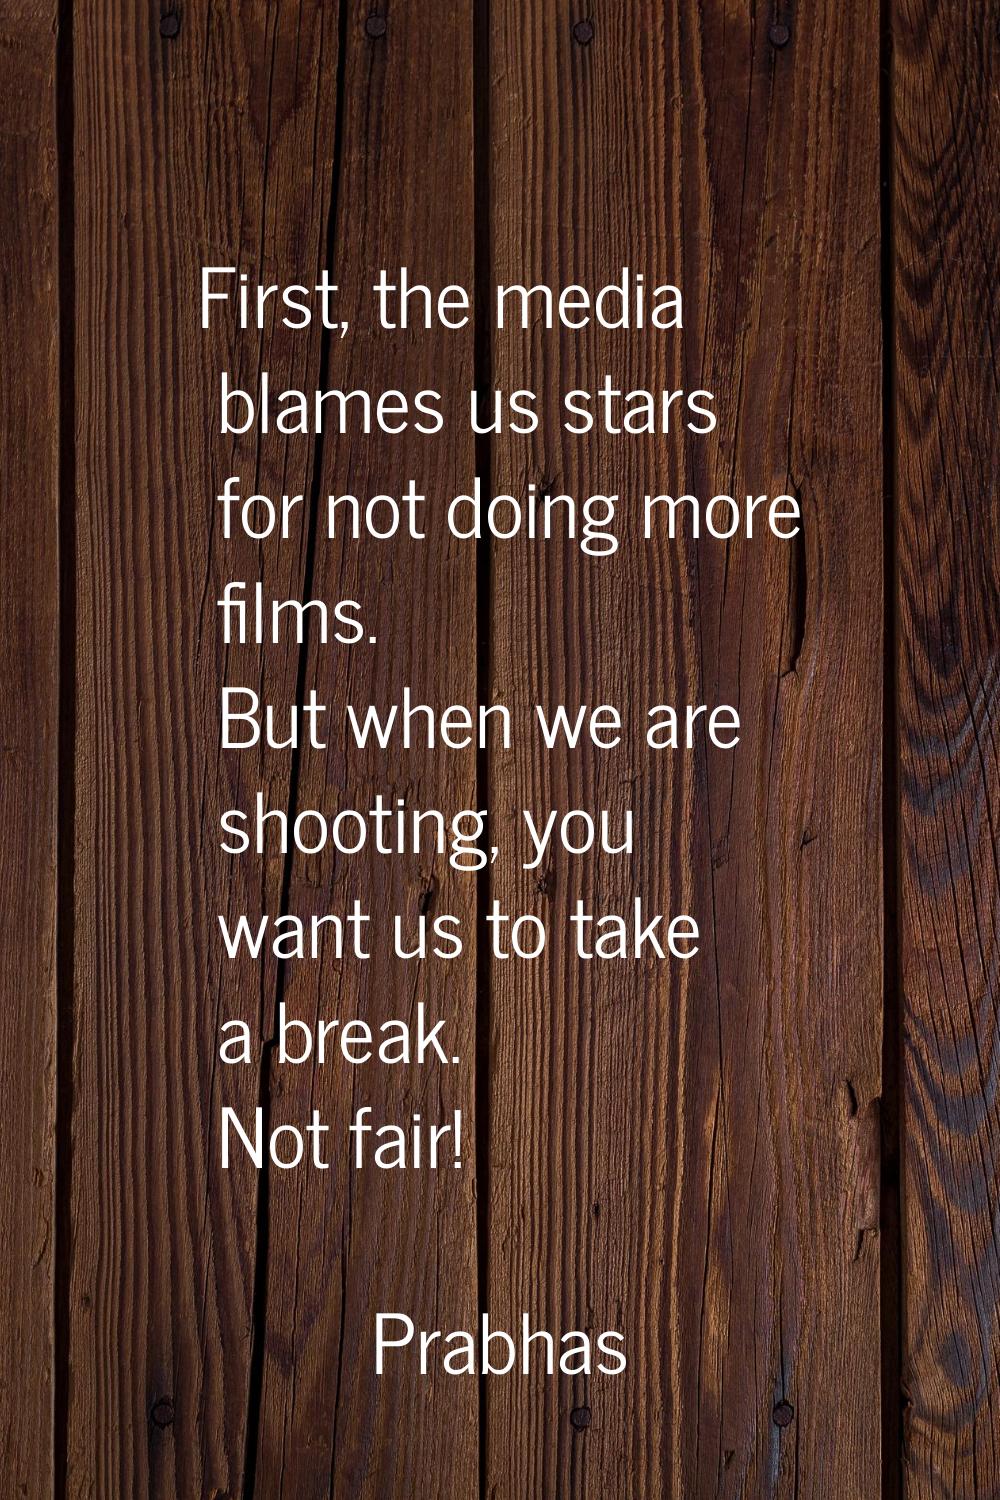 First, the media blames us stars for not doing more films. But when we are shooting, you want us to